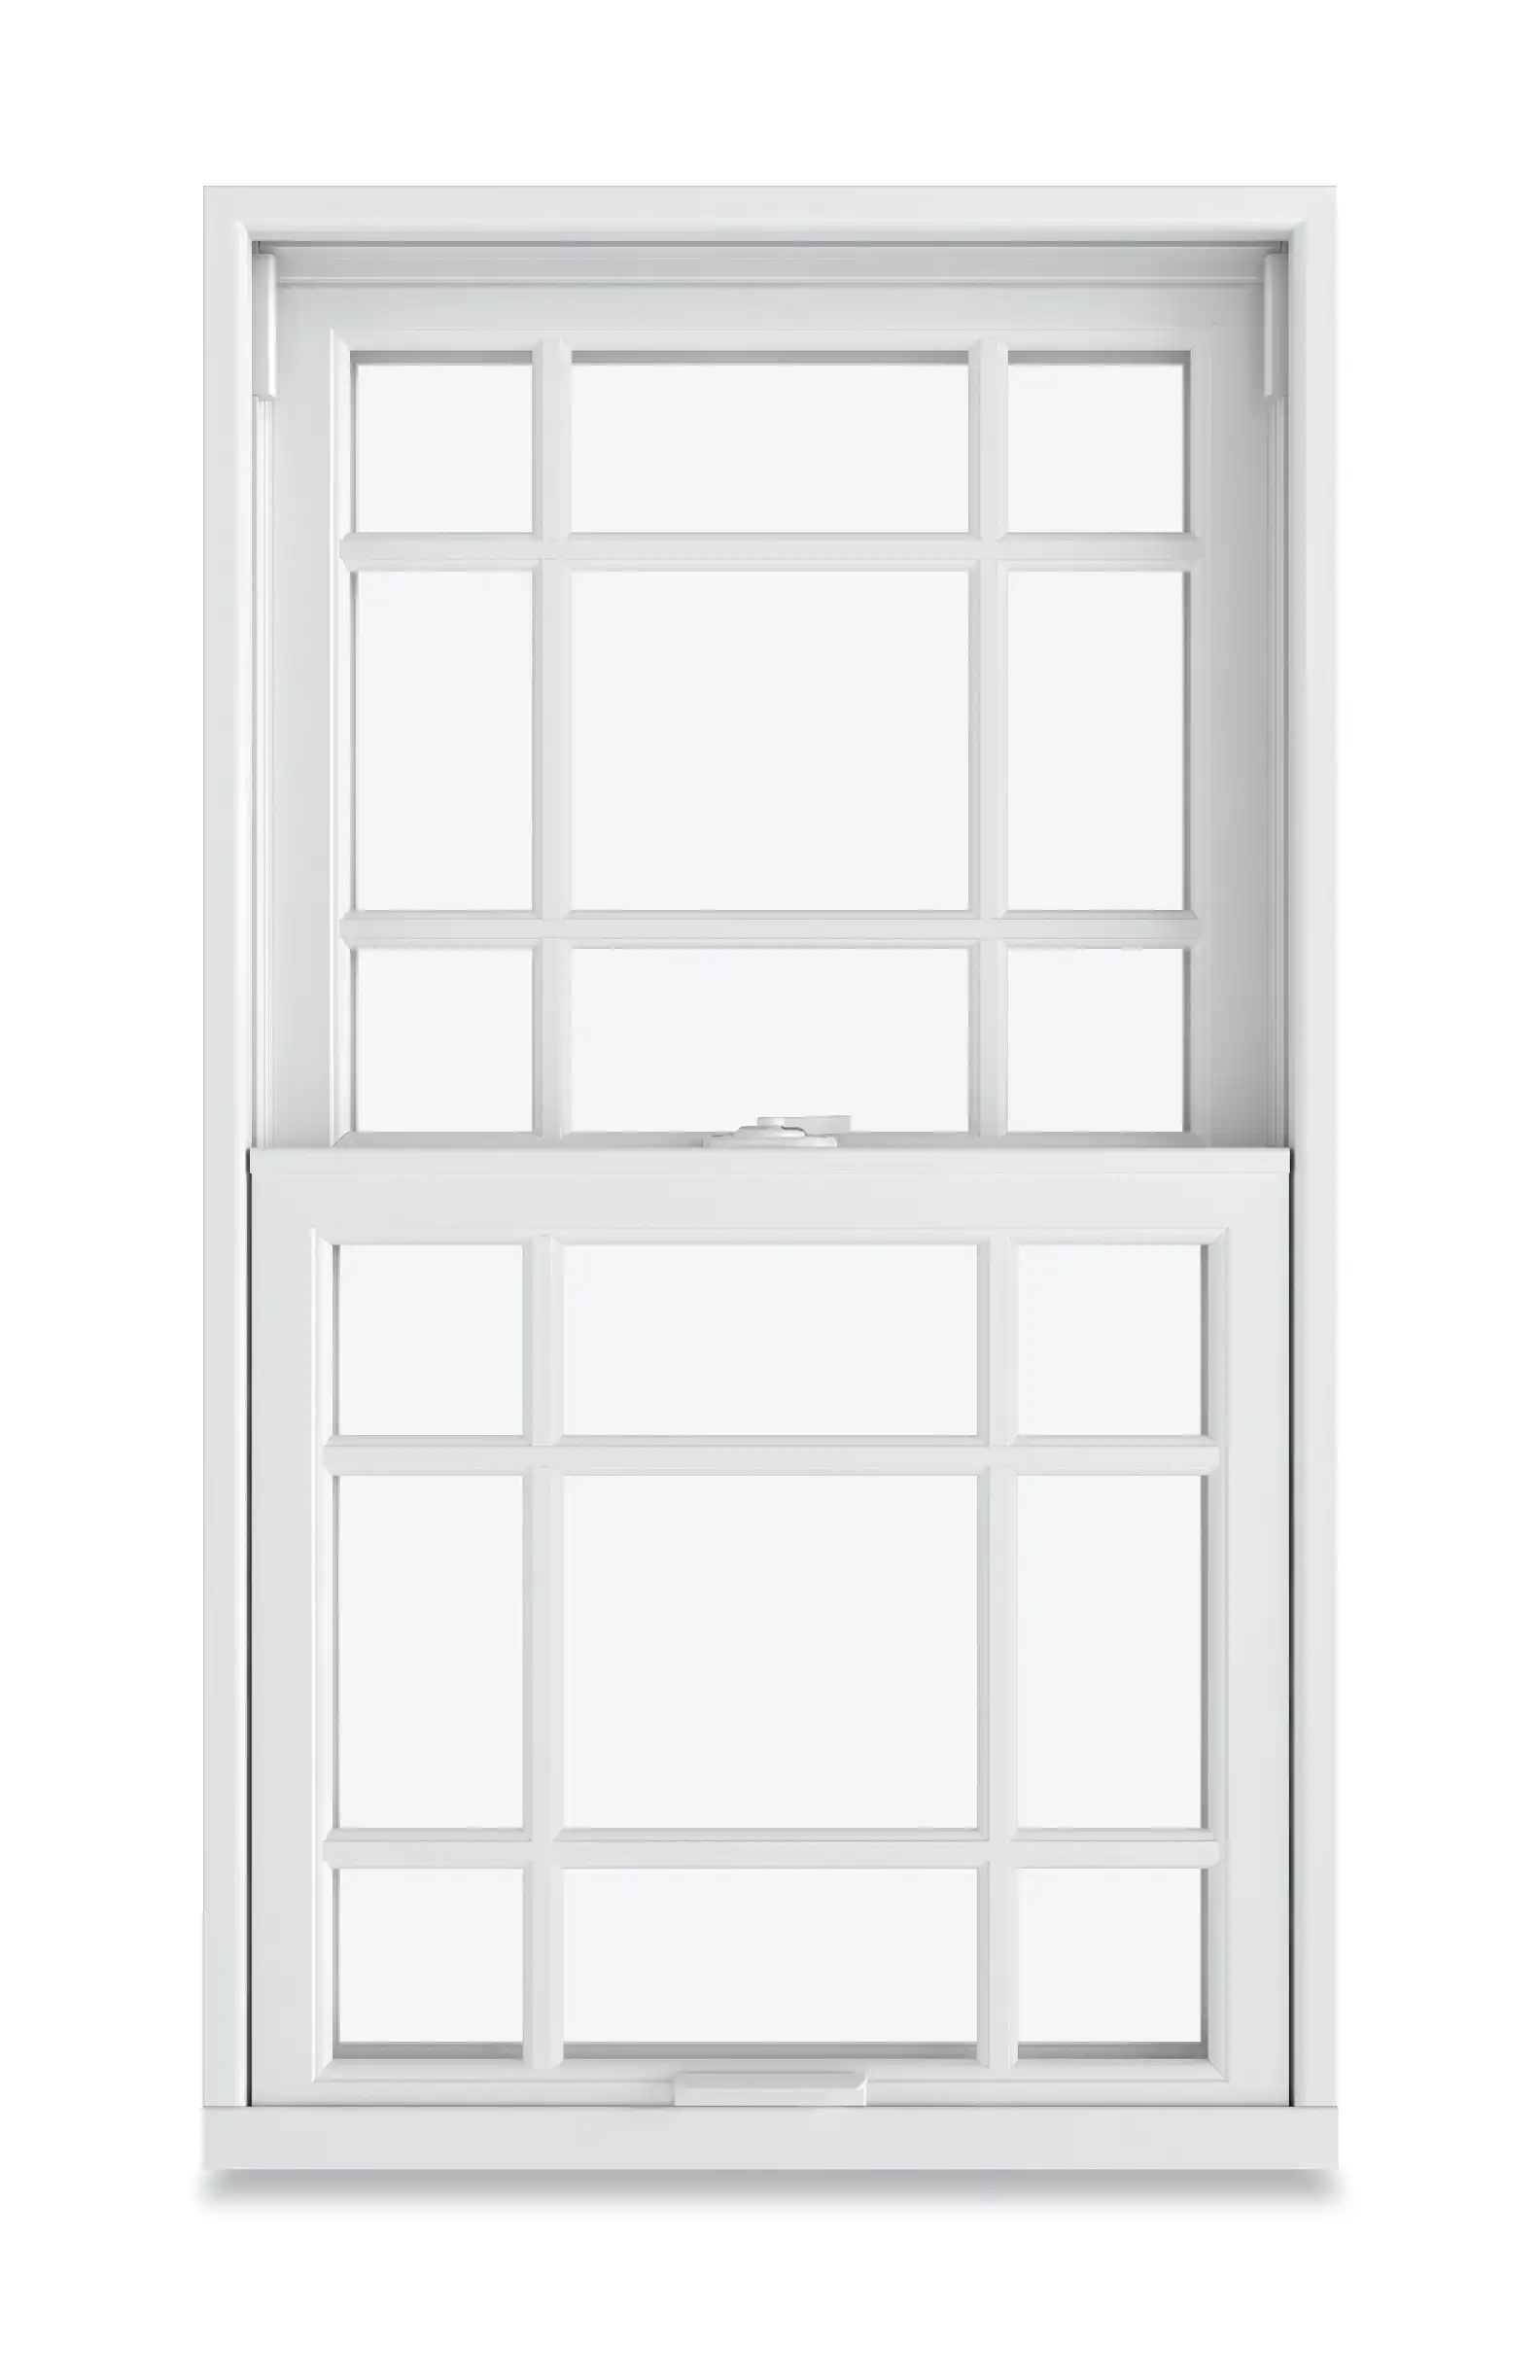 Image of a white Marvin Hung Double Hung window with a Prairie 9-lite style.